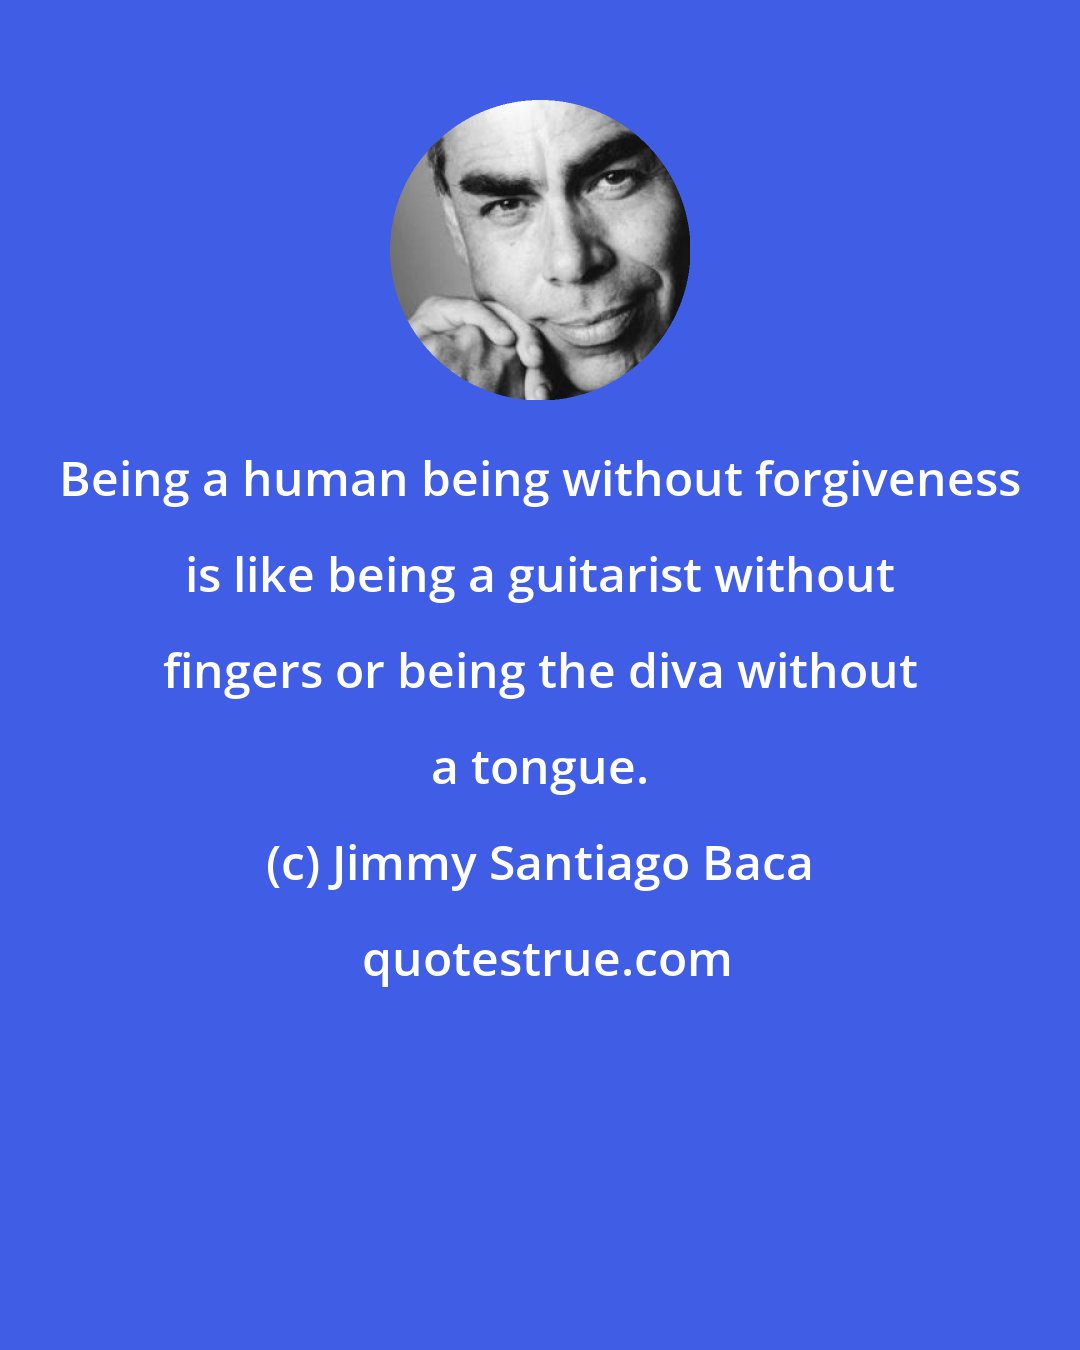 Jimmy Santiago Baca: Being a human being without forgiveness is like being a guitarist without fingers or being the diva without a tongue.